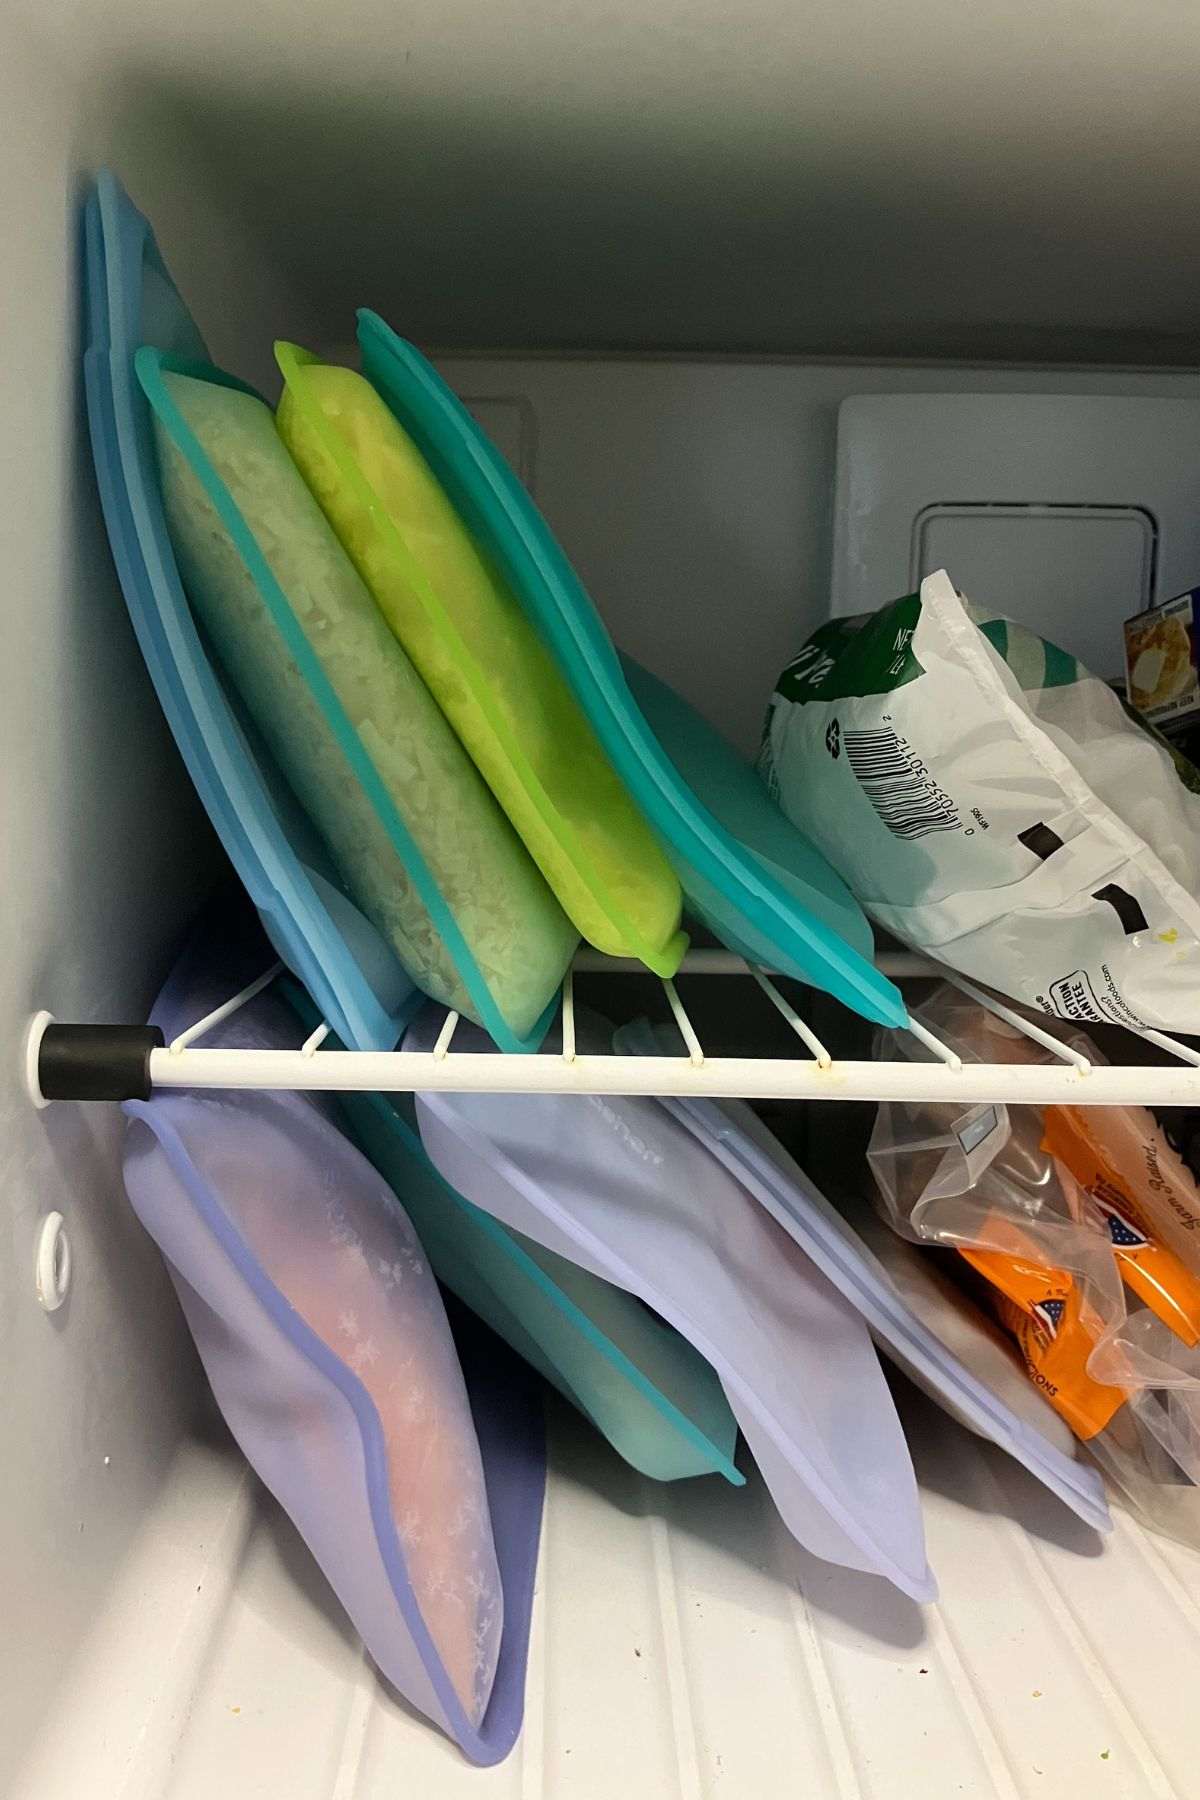 colorful bags of food in freezer